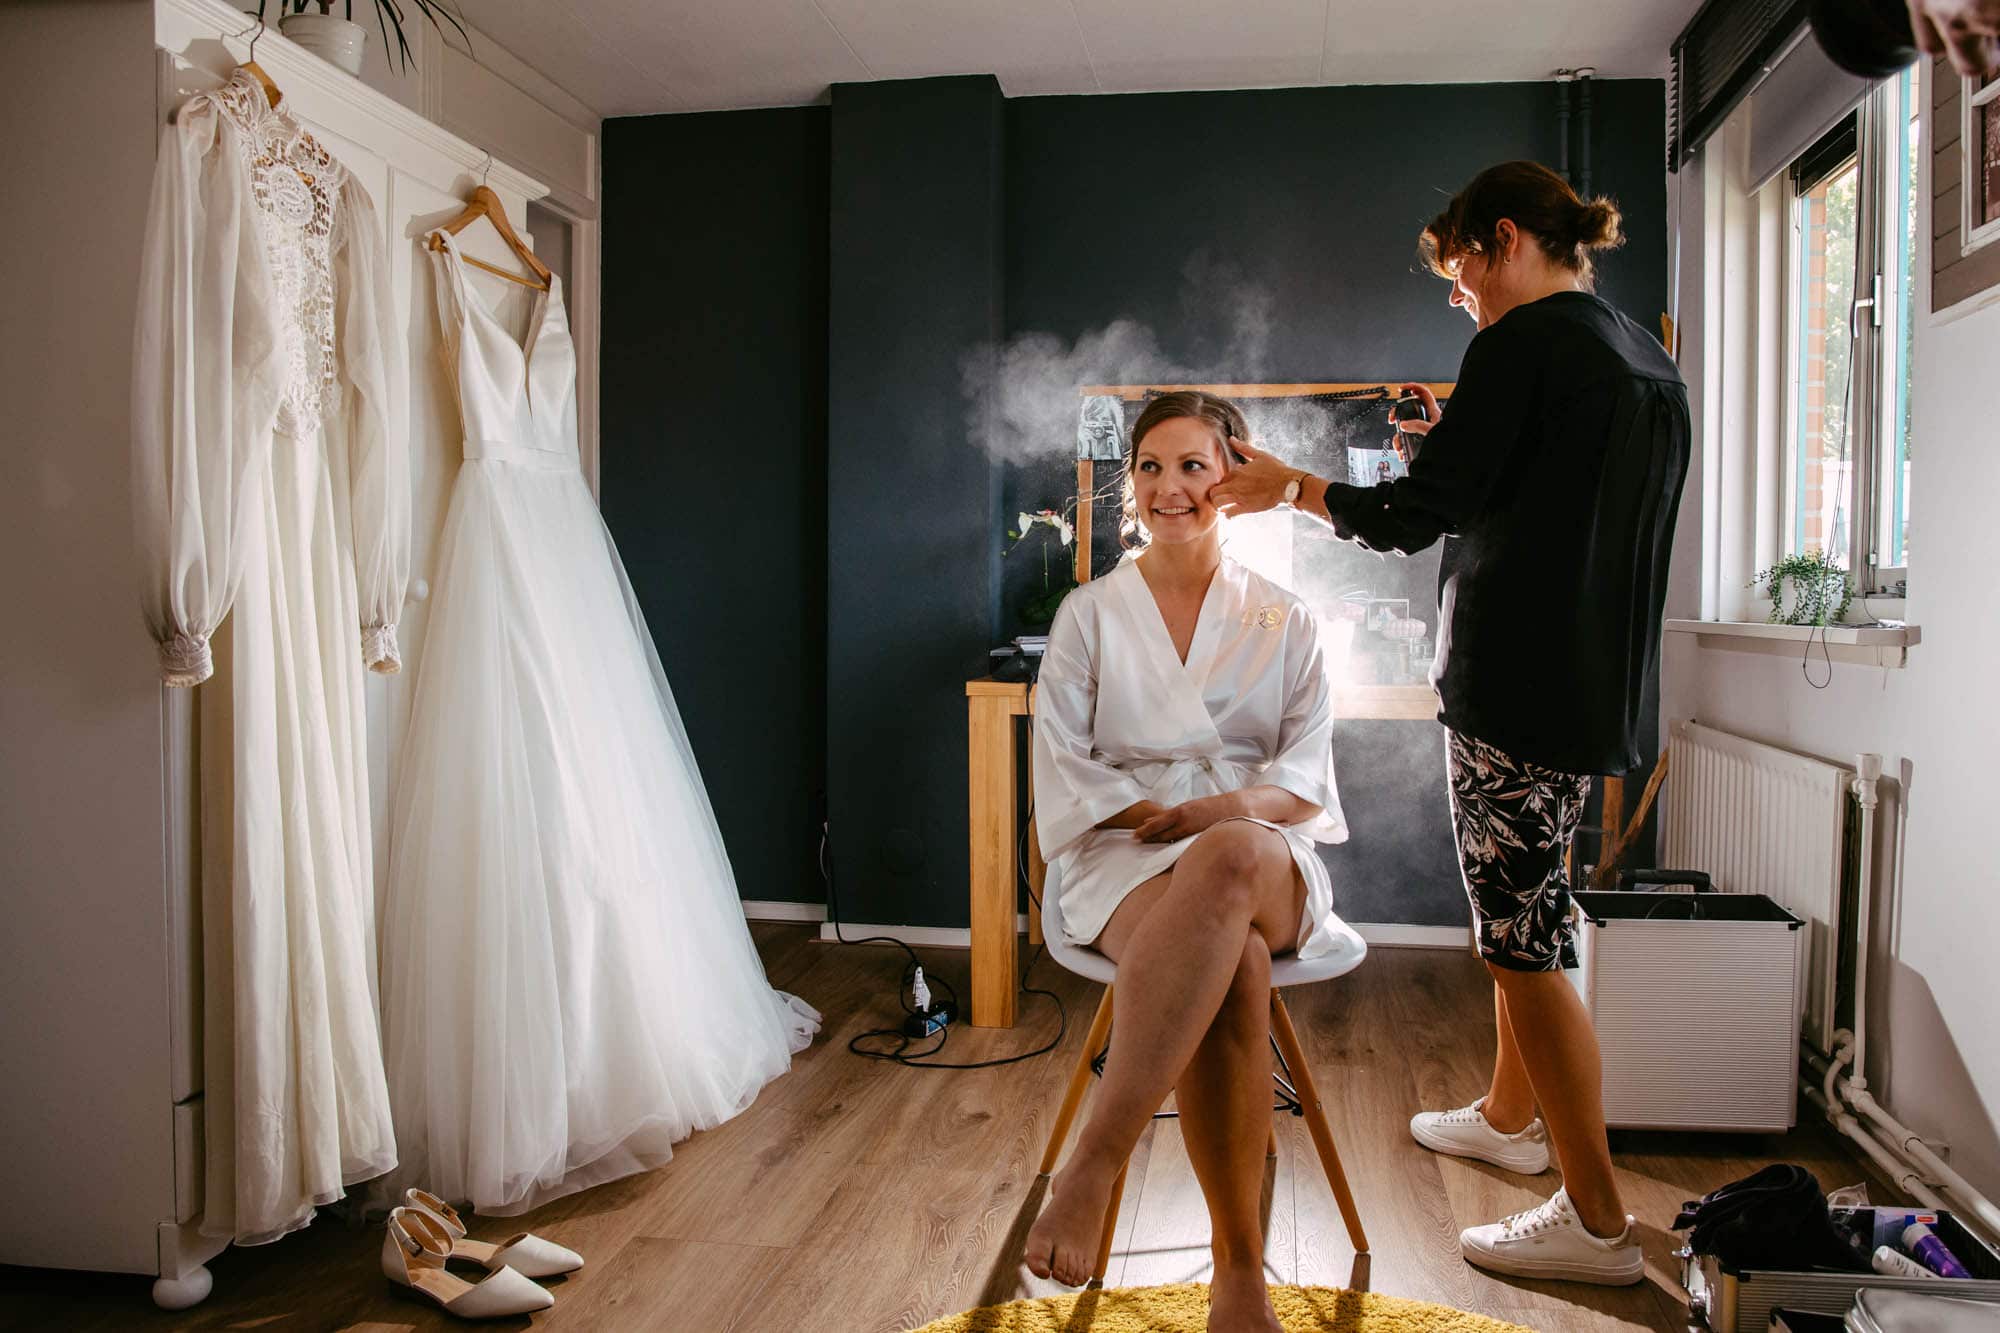 A bride having her hair and make-up done in a room.